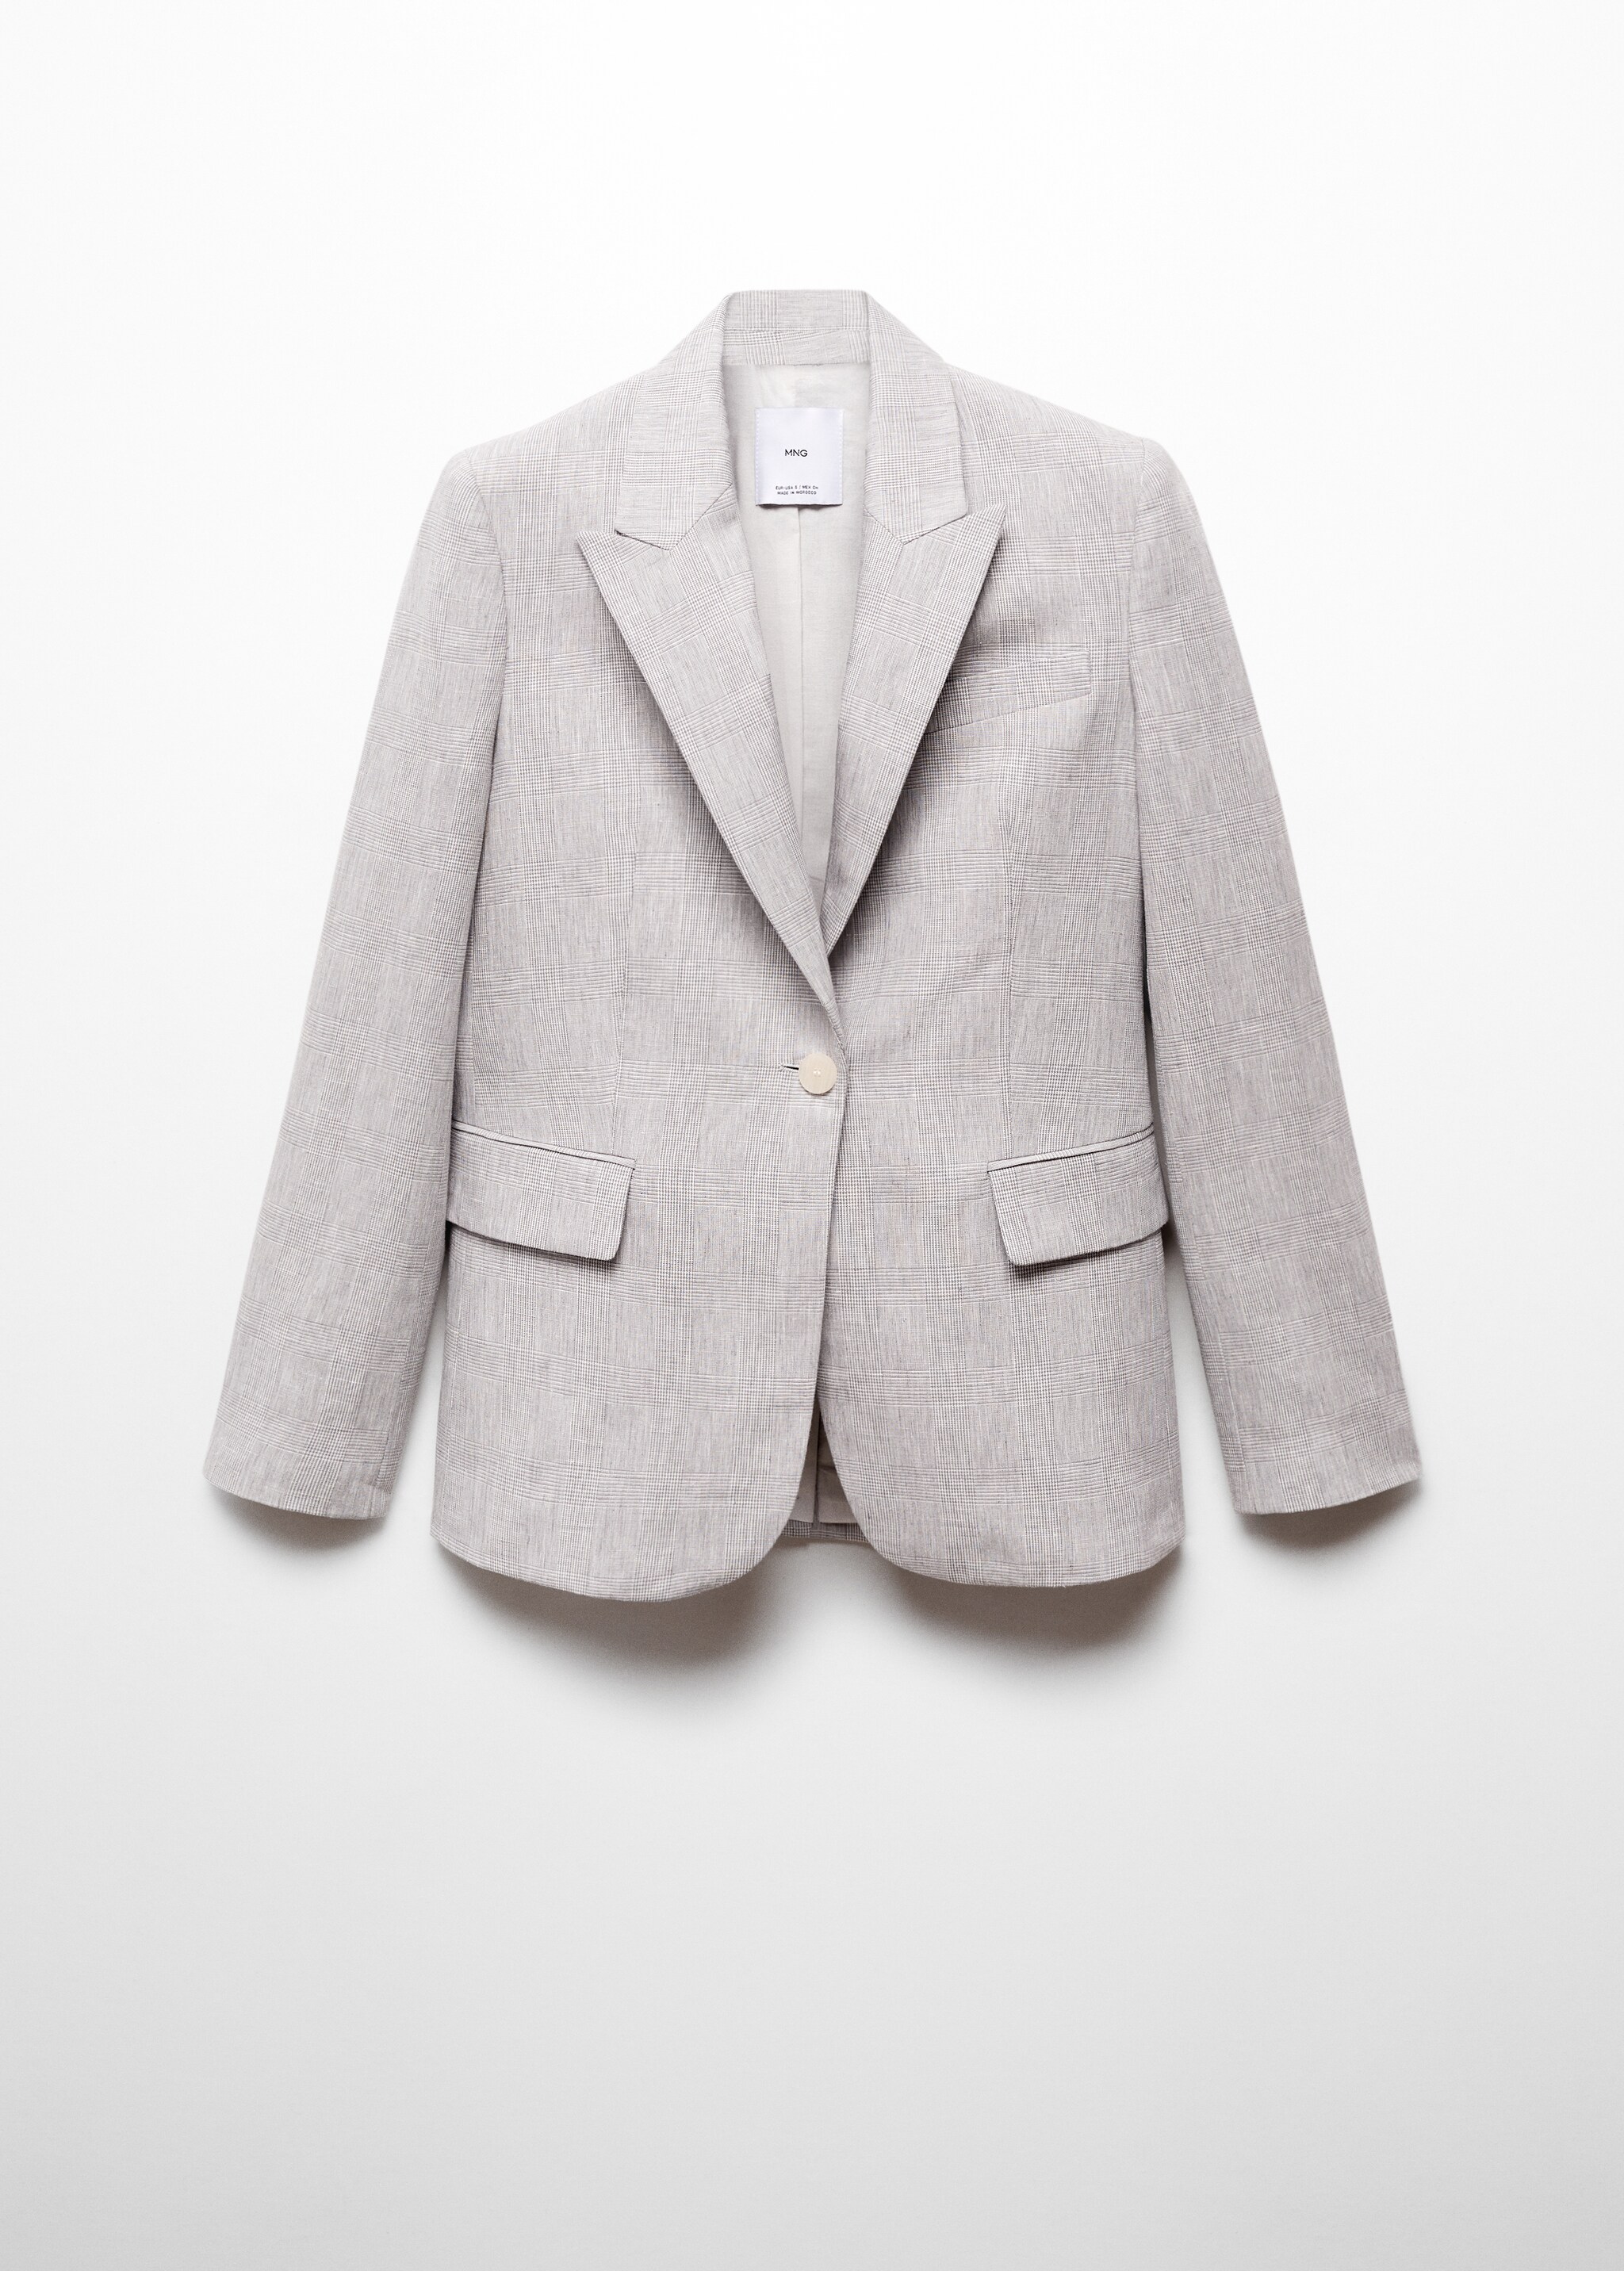 Houndstooth linen blazer - Article without model